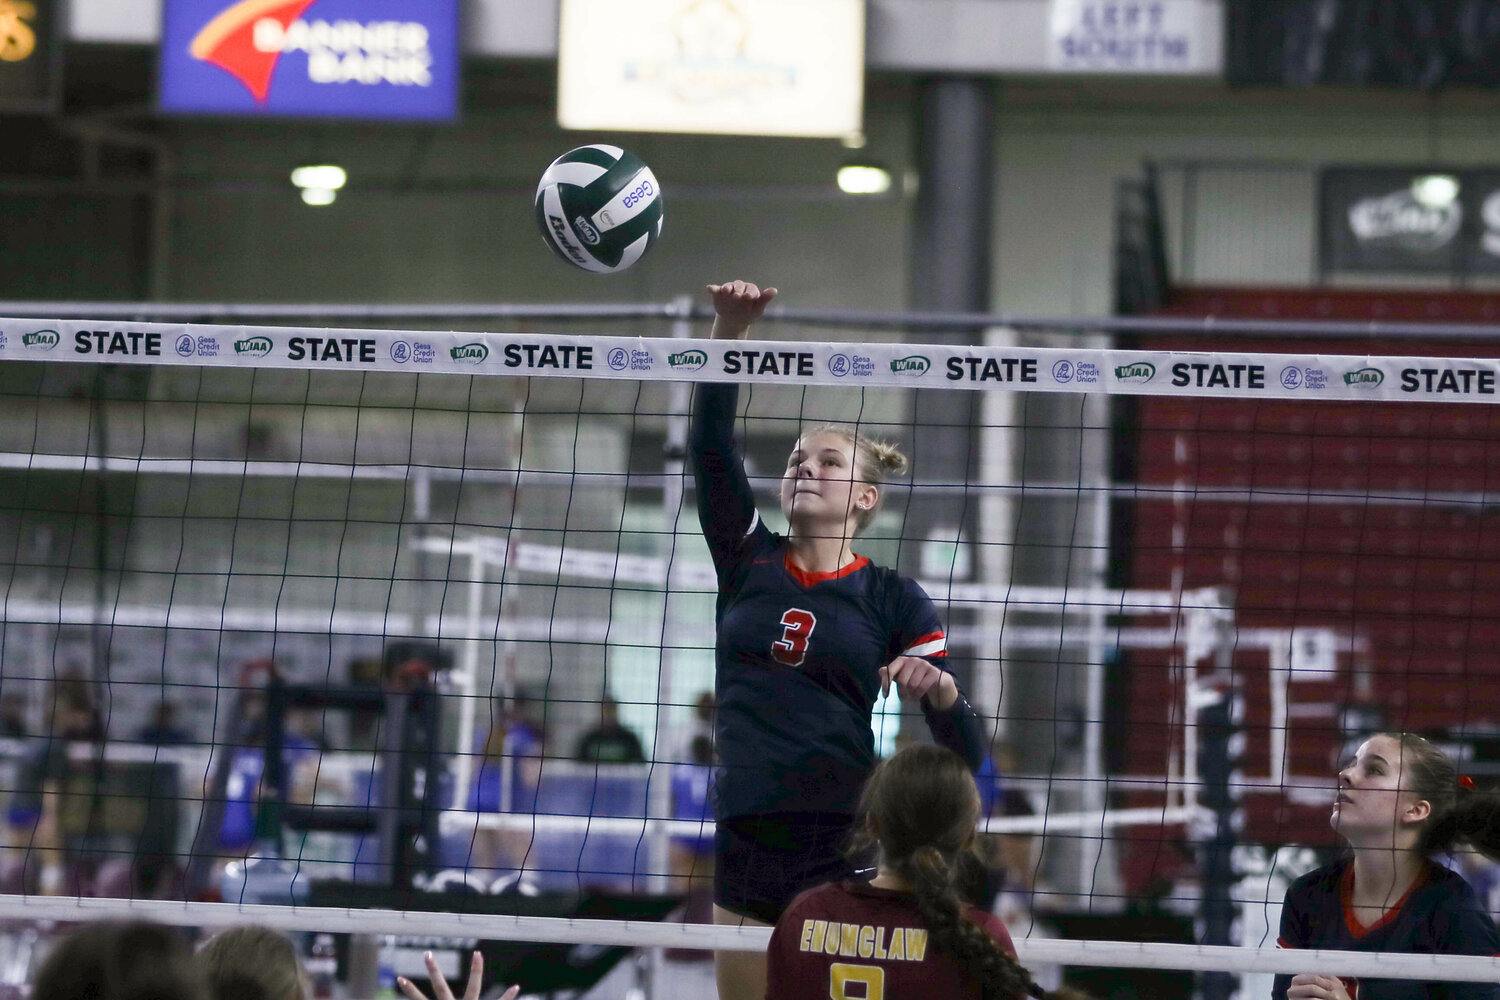 Ella Goheen bats the ball over the net during Black Hills' win over Enumclaw at the state tournament on Nov. 11 in Yakima.